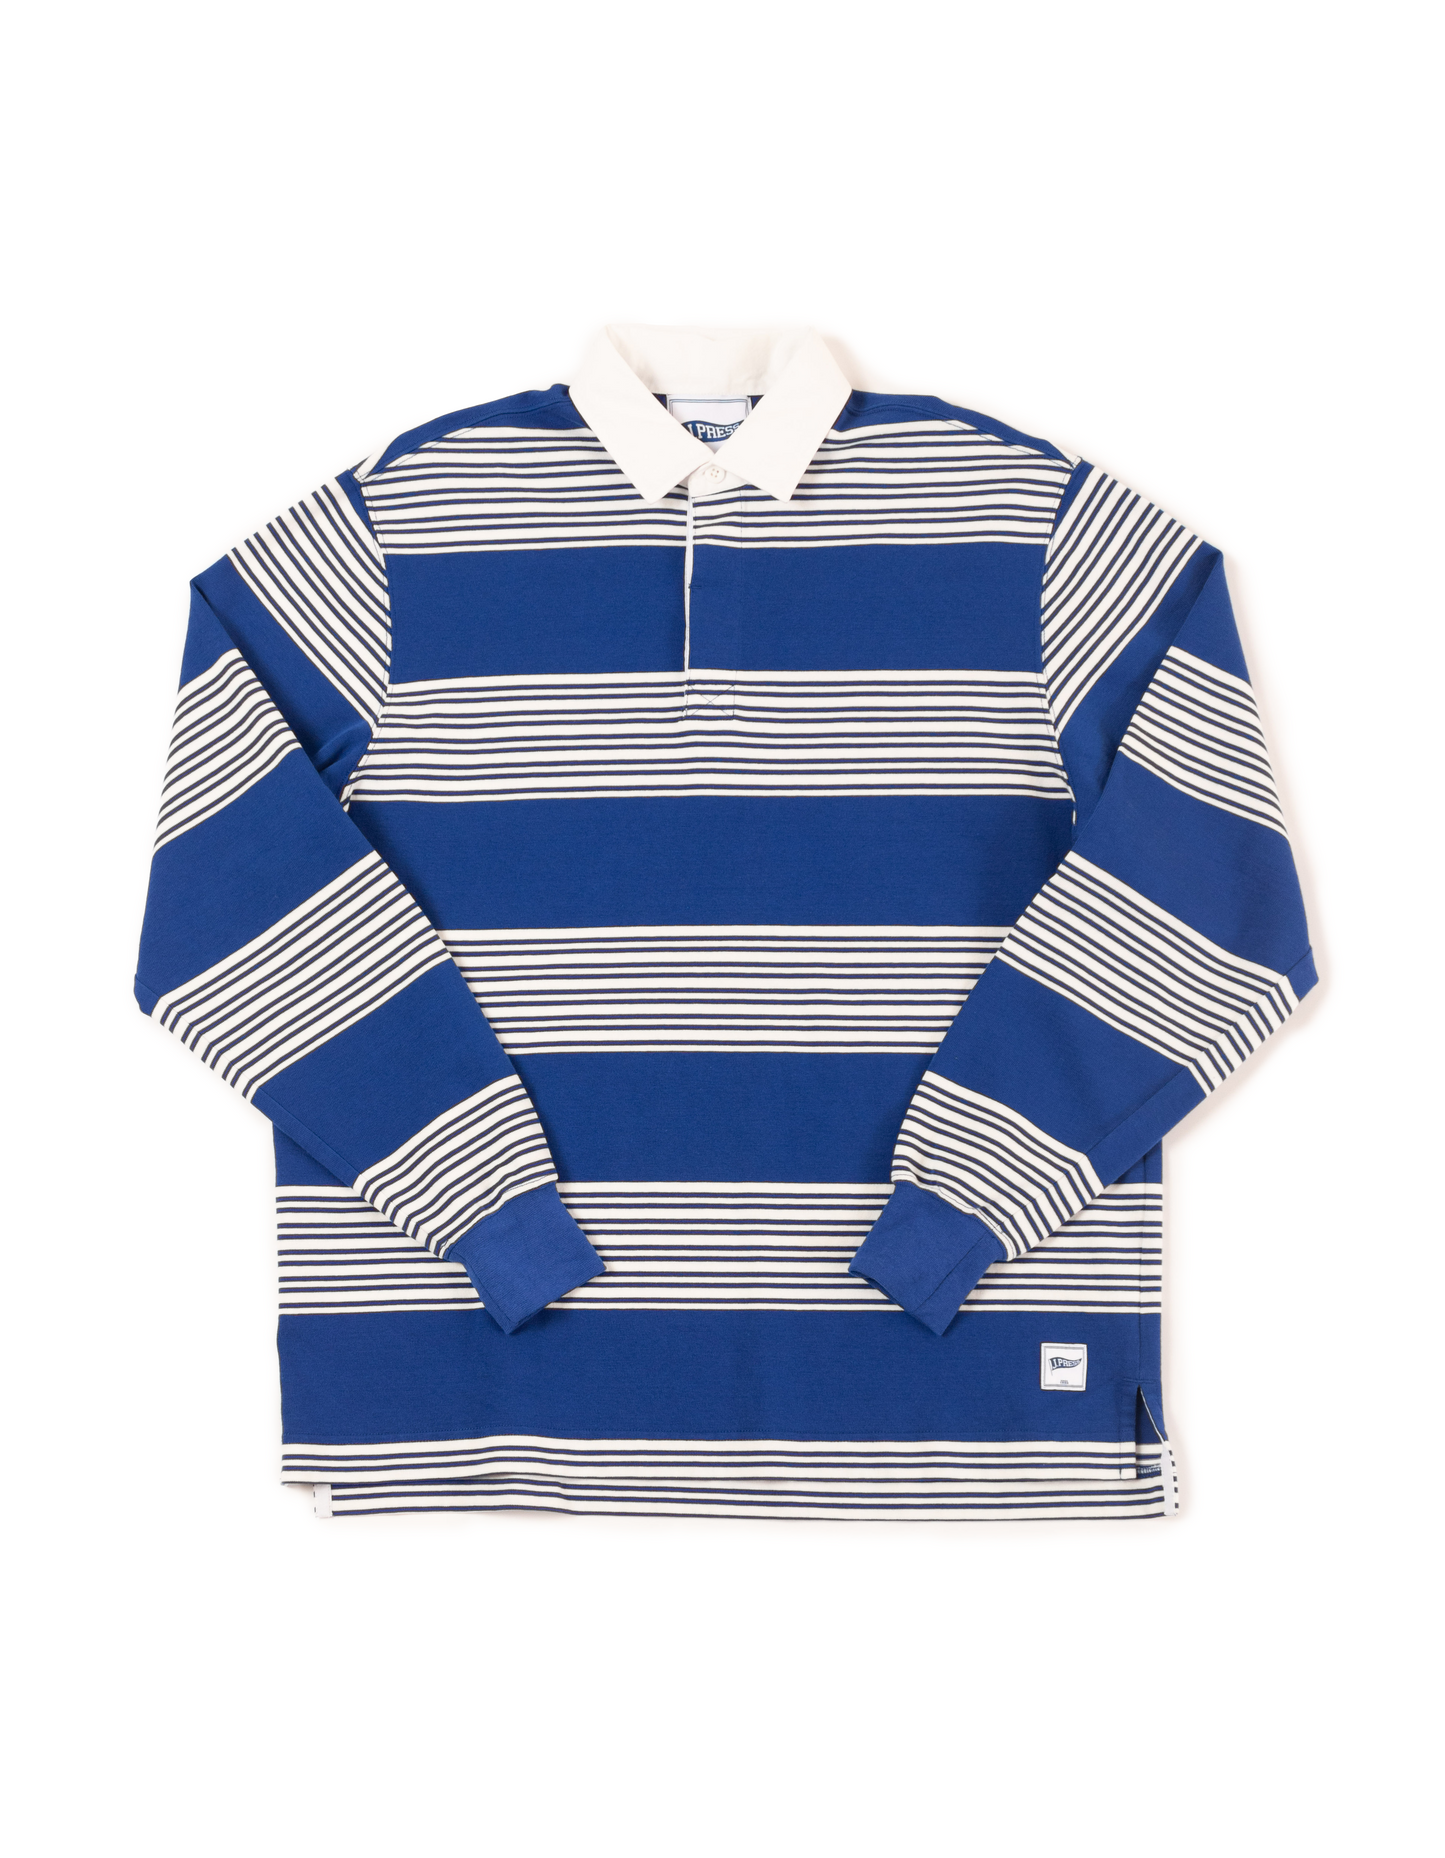 STRIPED RUGBY SHIRT - NAVY/WHITE